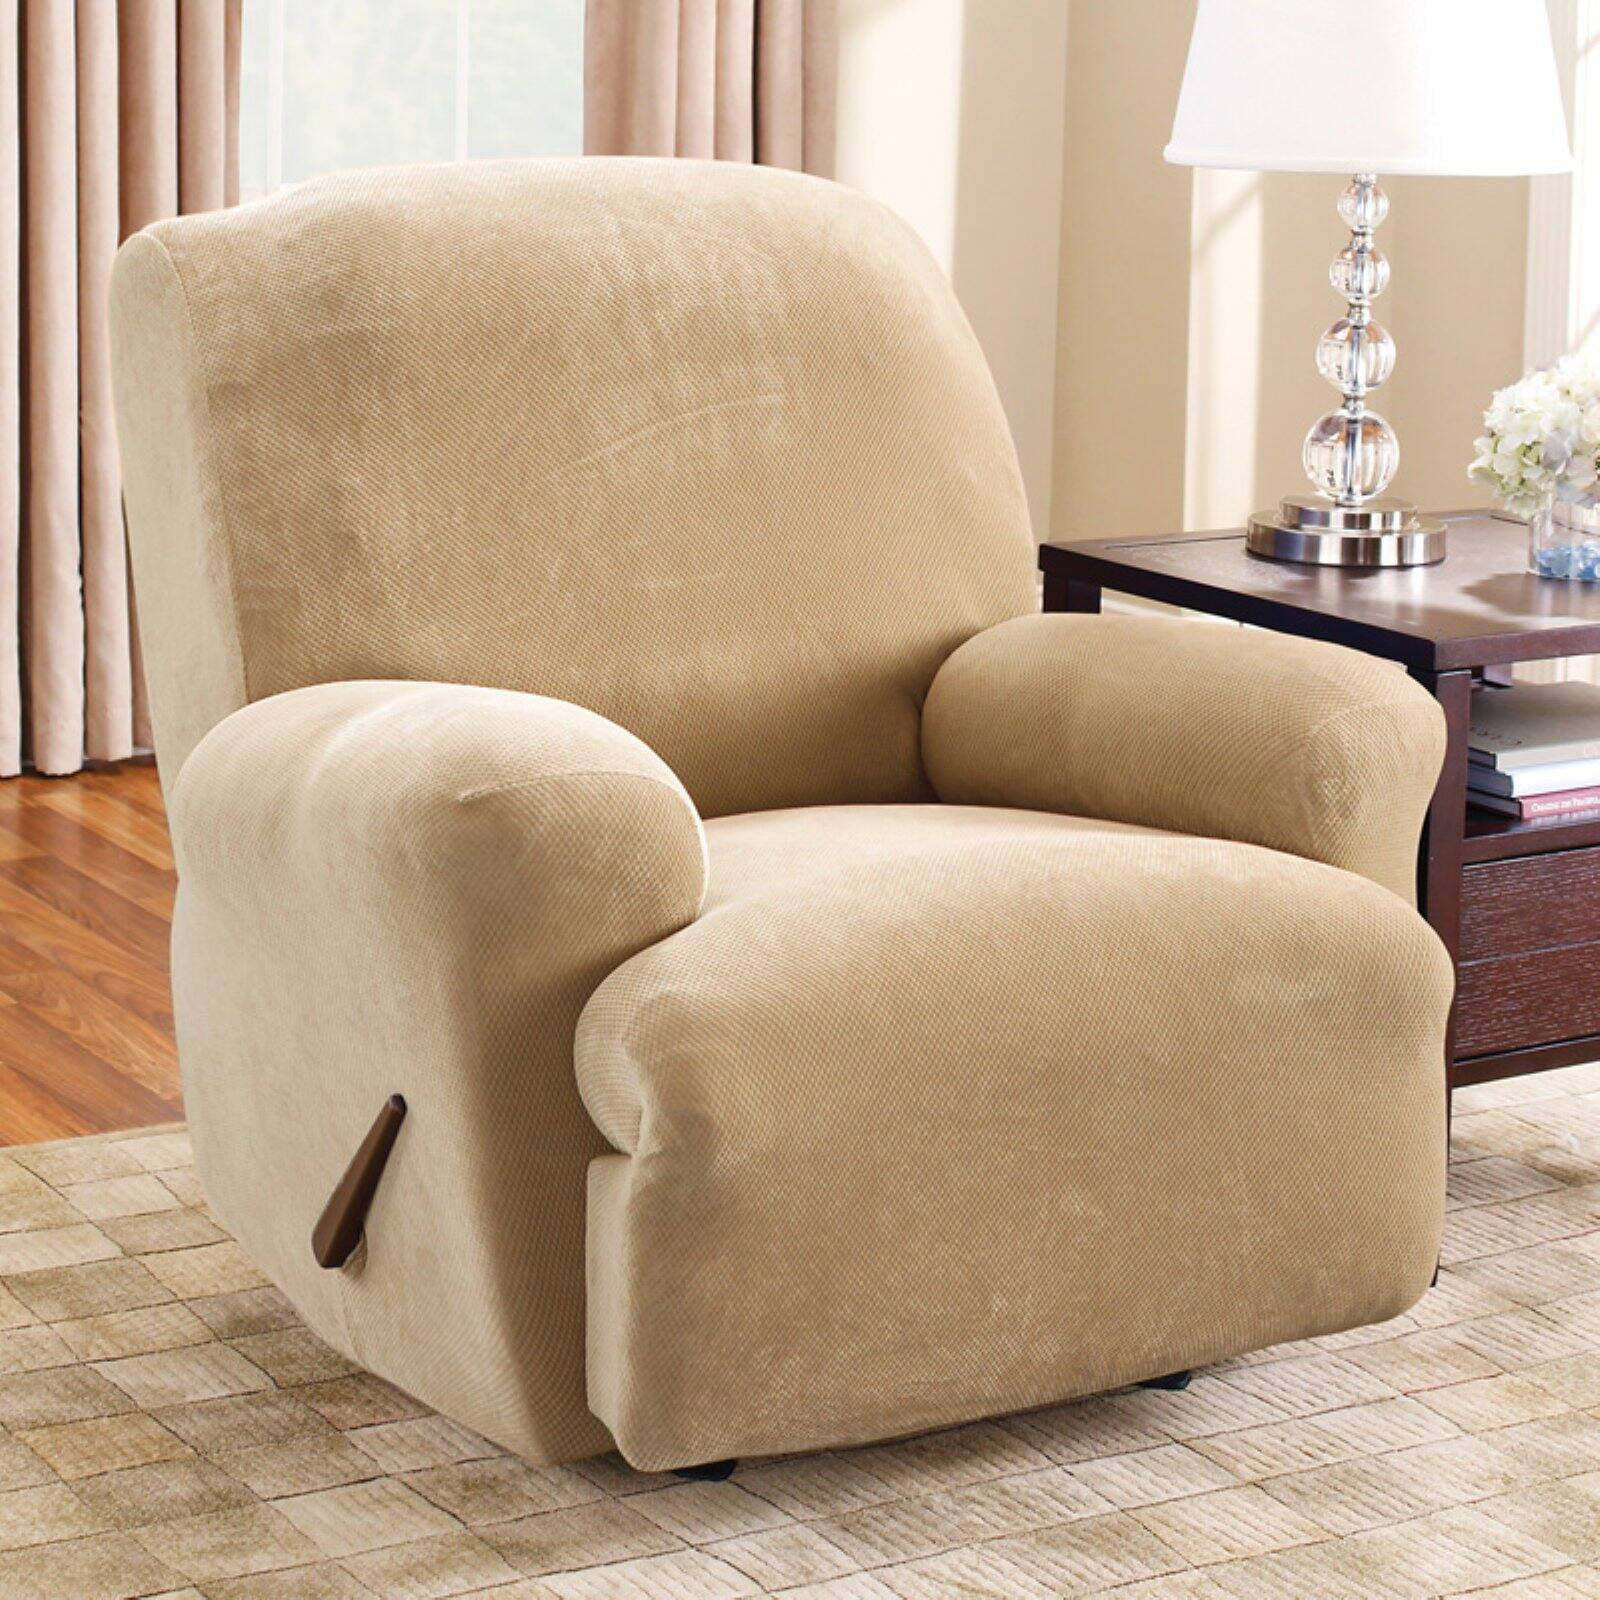 Recliner chair covers